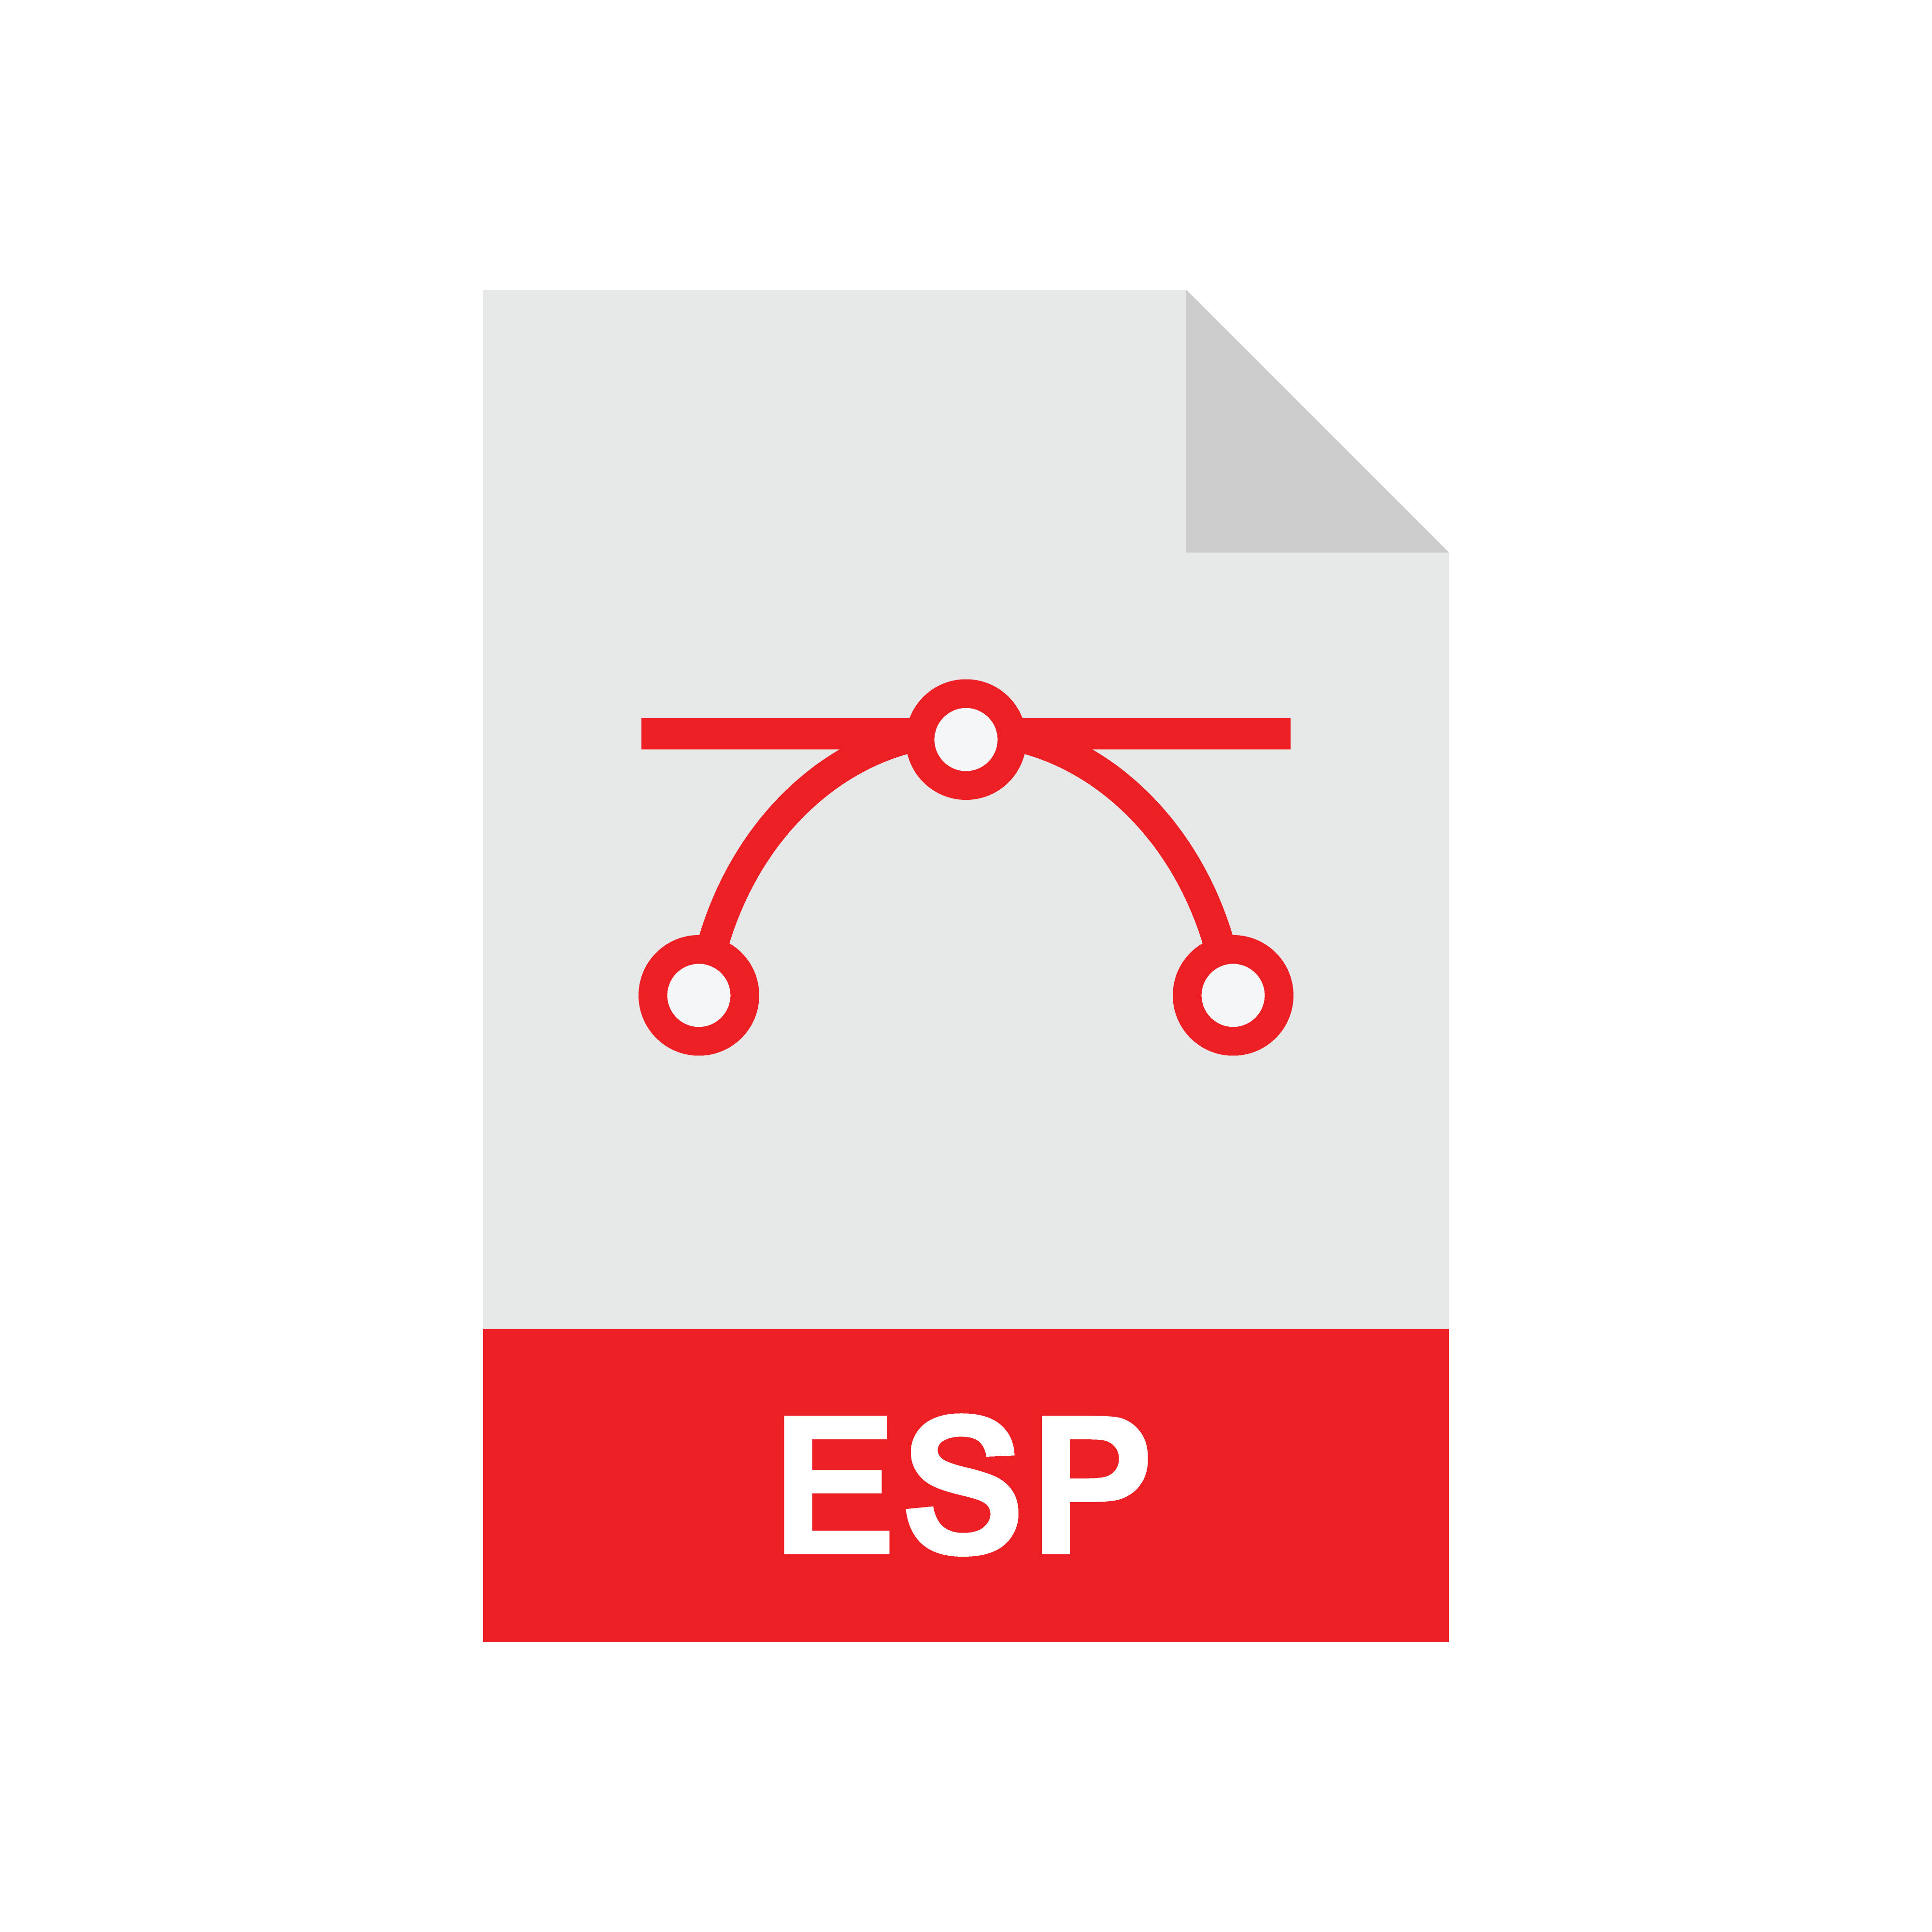 ESP format file vector icon. ESP format file Template for your design